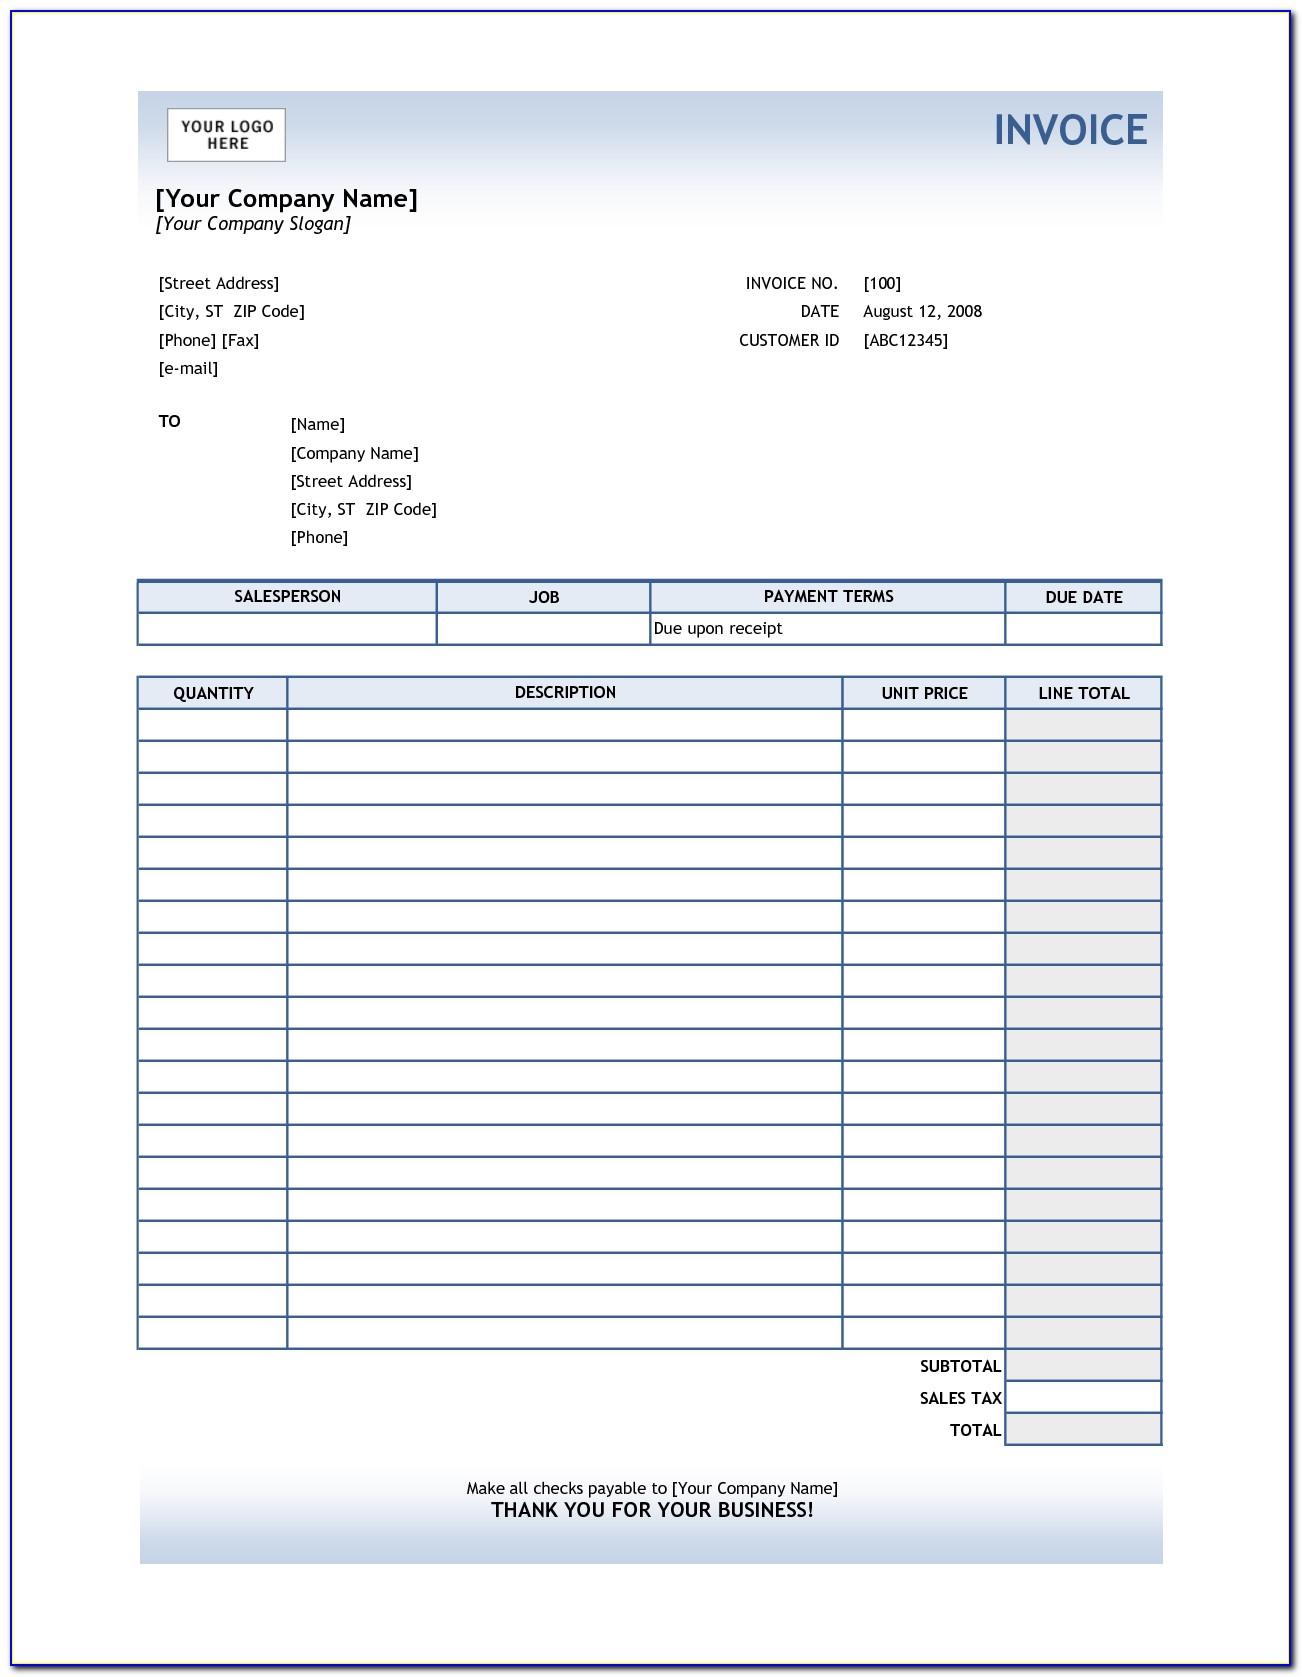 Excel Template For Tracking Invoices